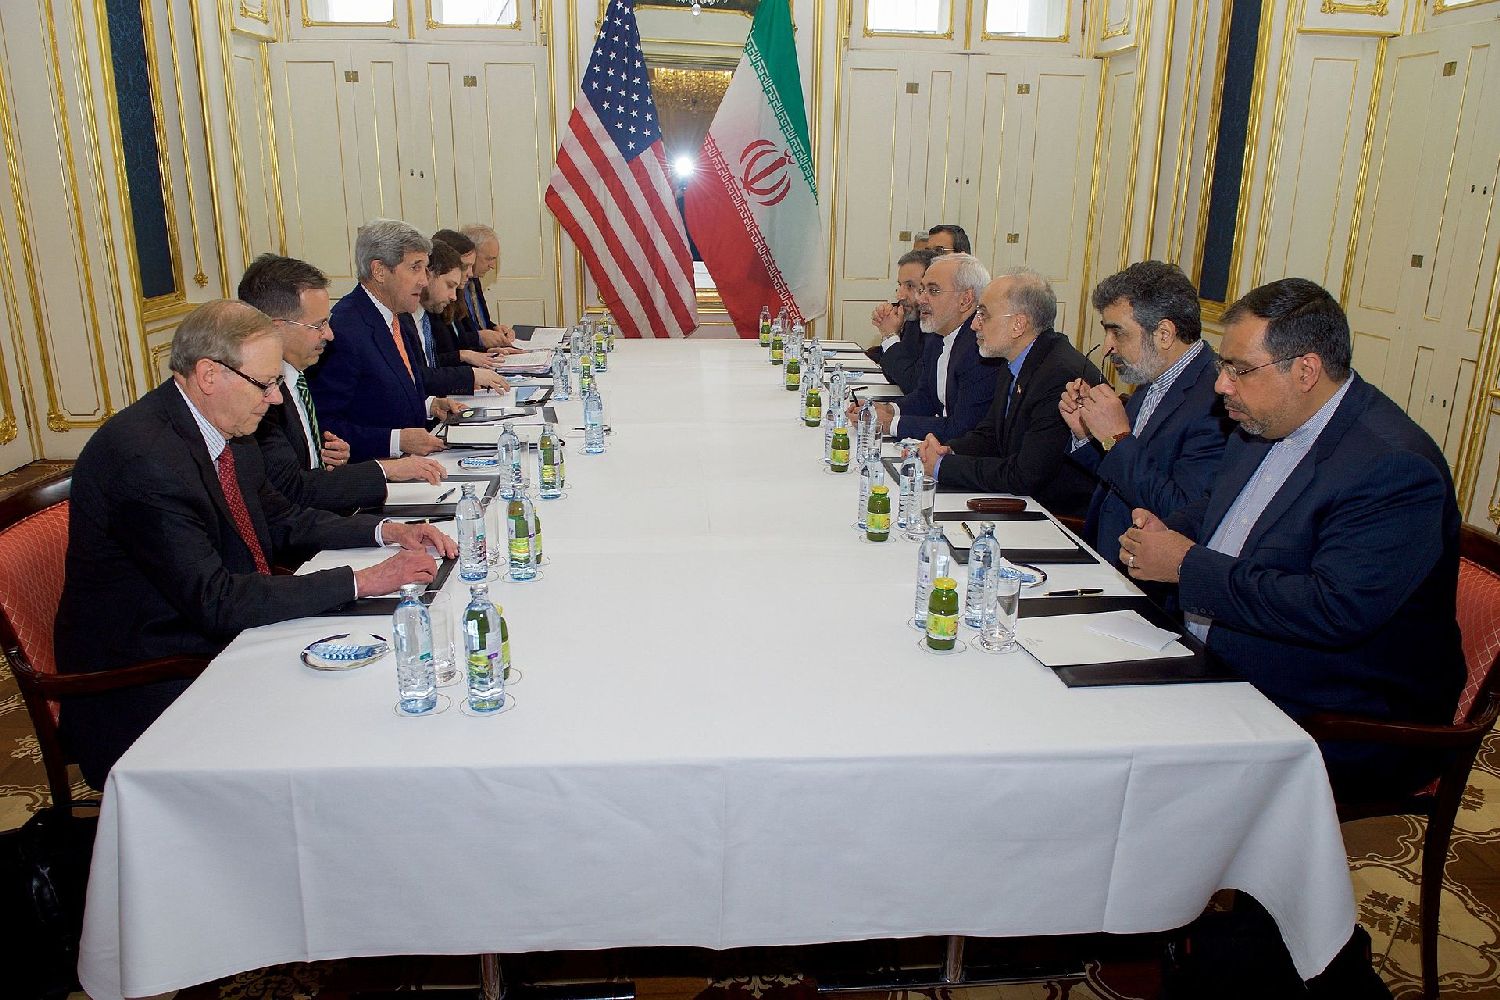 Prospects for the development of U.S.-Iran relations